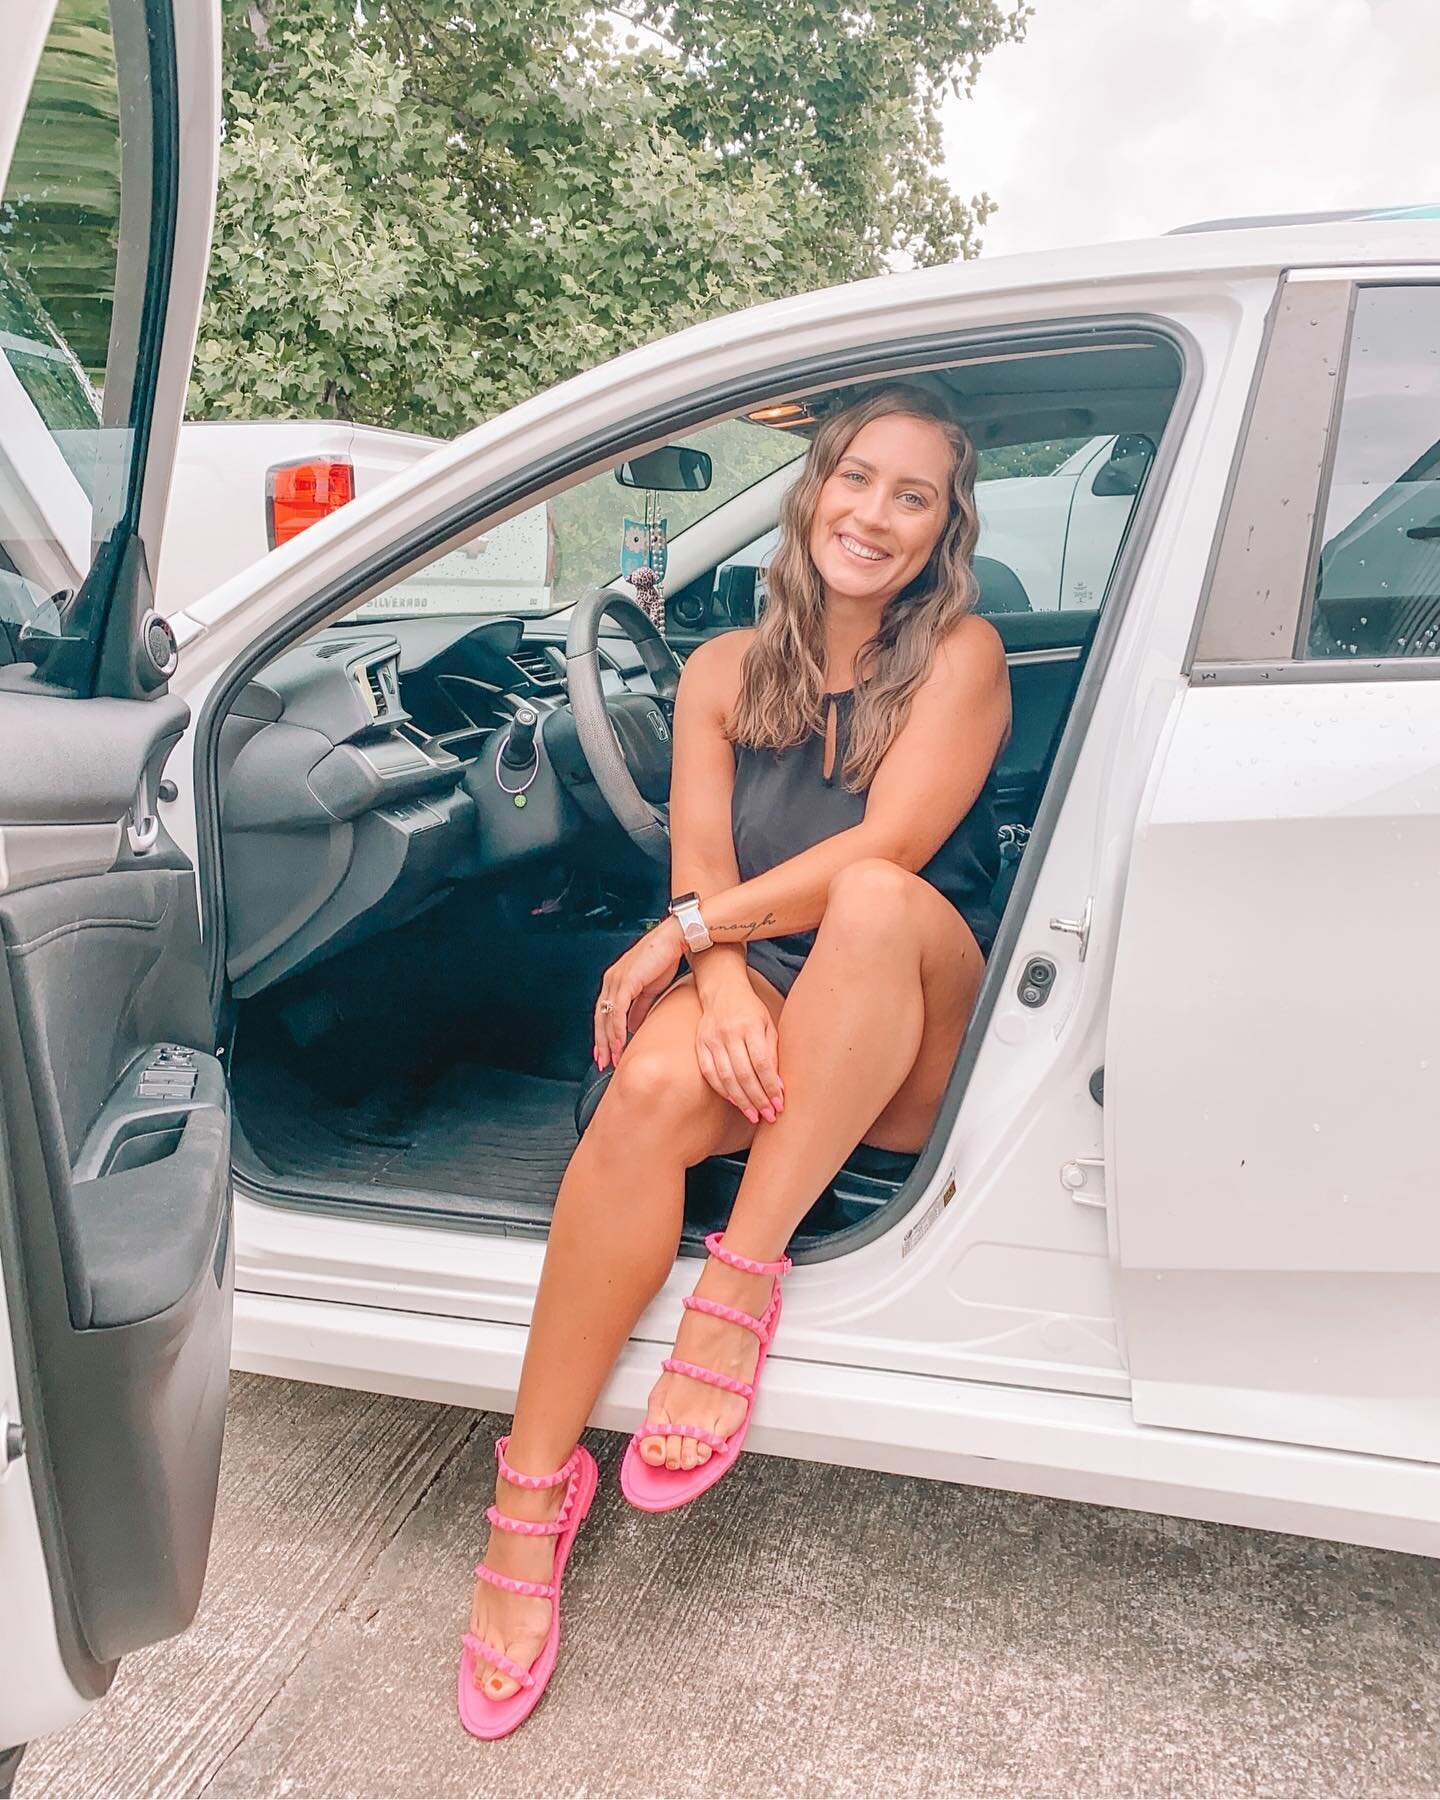 If you&rsquo;re curious what I keep in my car I posted a YouTube video showing y&rsquo;all all the random stuff in it. Just click &lsquo;latest YouTube video&rsquo; in my bio to watch! Also had to show off my new super cute hot pink shoes! 😍😍 Yes t